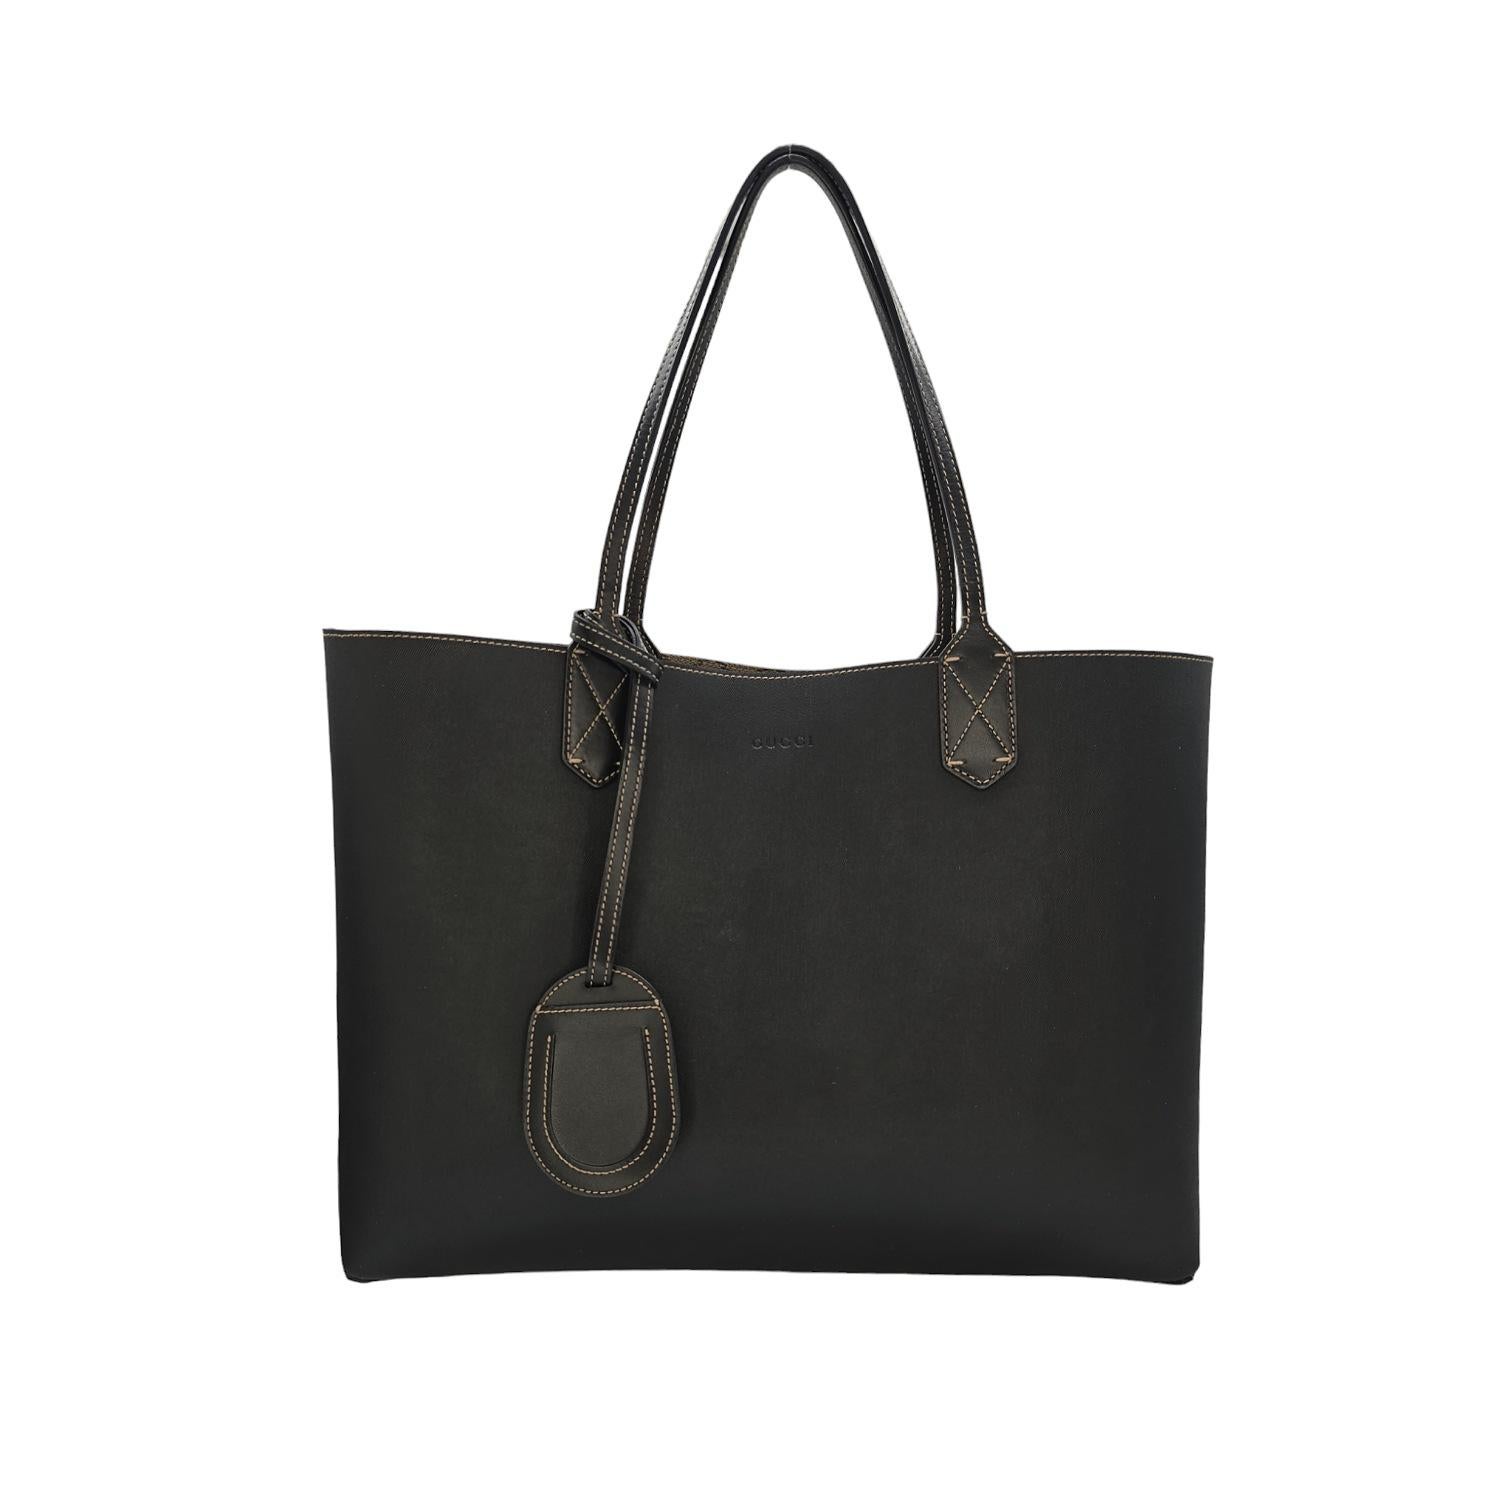 This stylish tote is crafted of classic Gucci GG monogram coated canvas, with a reversible coated black canvas lining, and black leather top handles. This versatile tote is perfect for all of your daily necessities.

Designer: Gucci
Material: GG